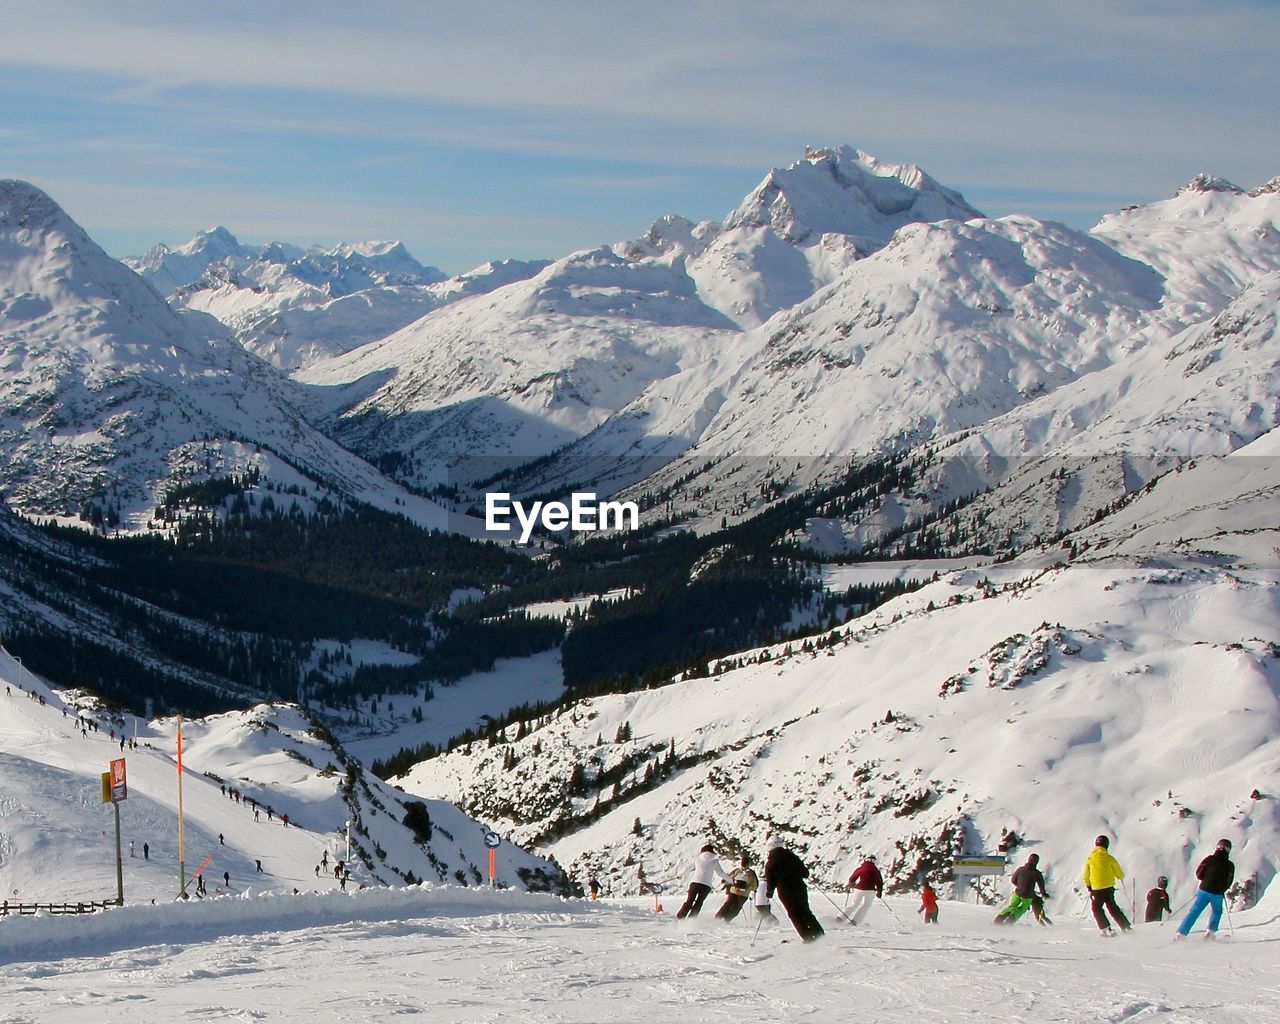 People skiing at lech